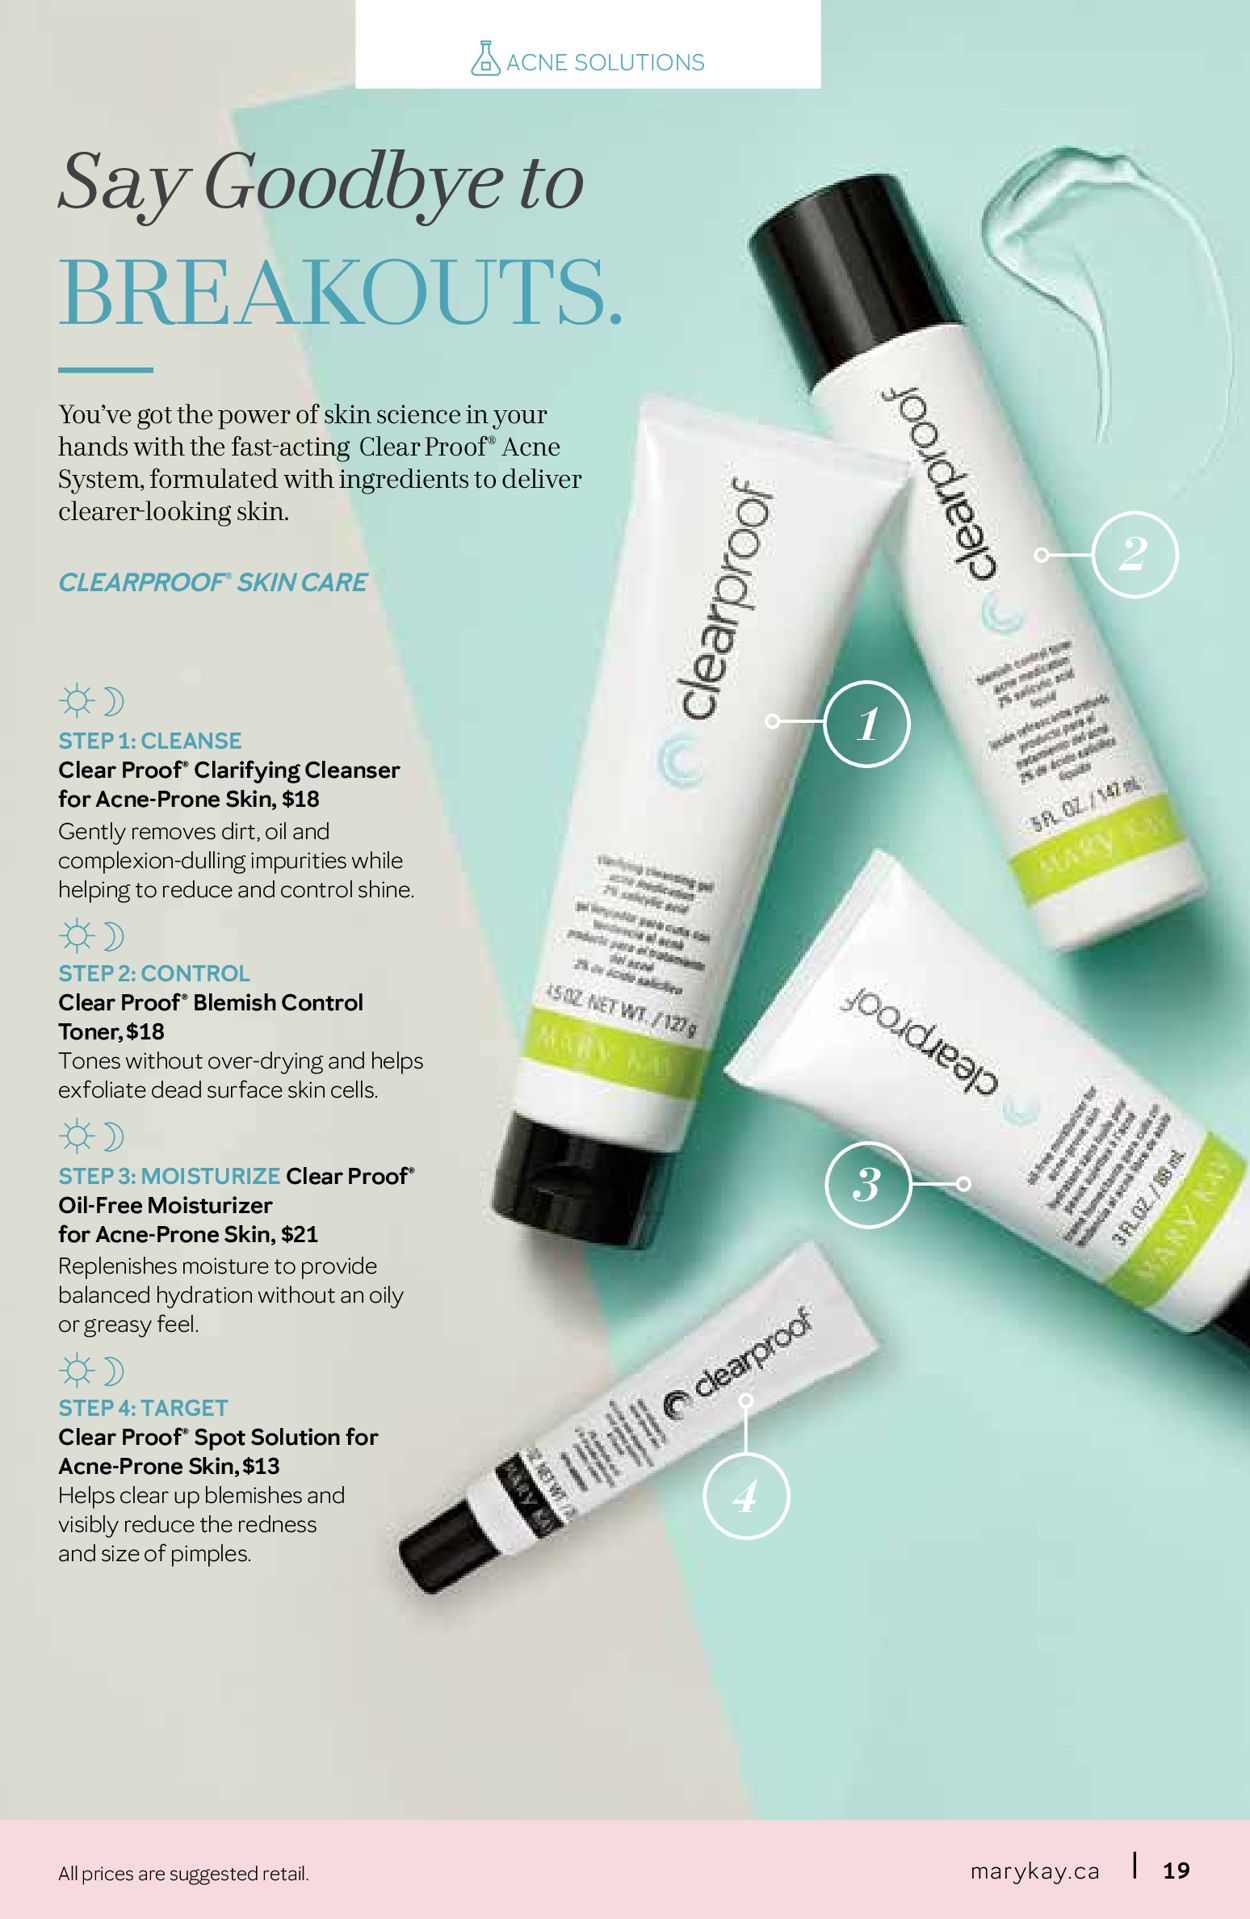 Mary Kay Flyer from 11/16/2020